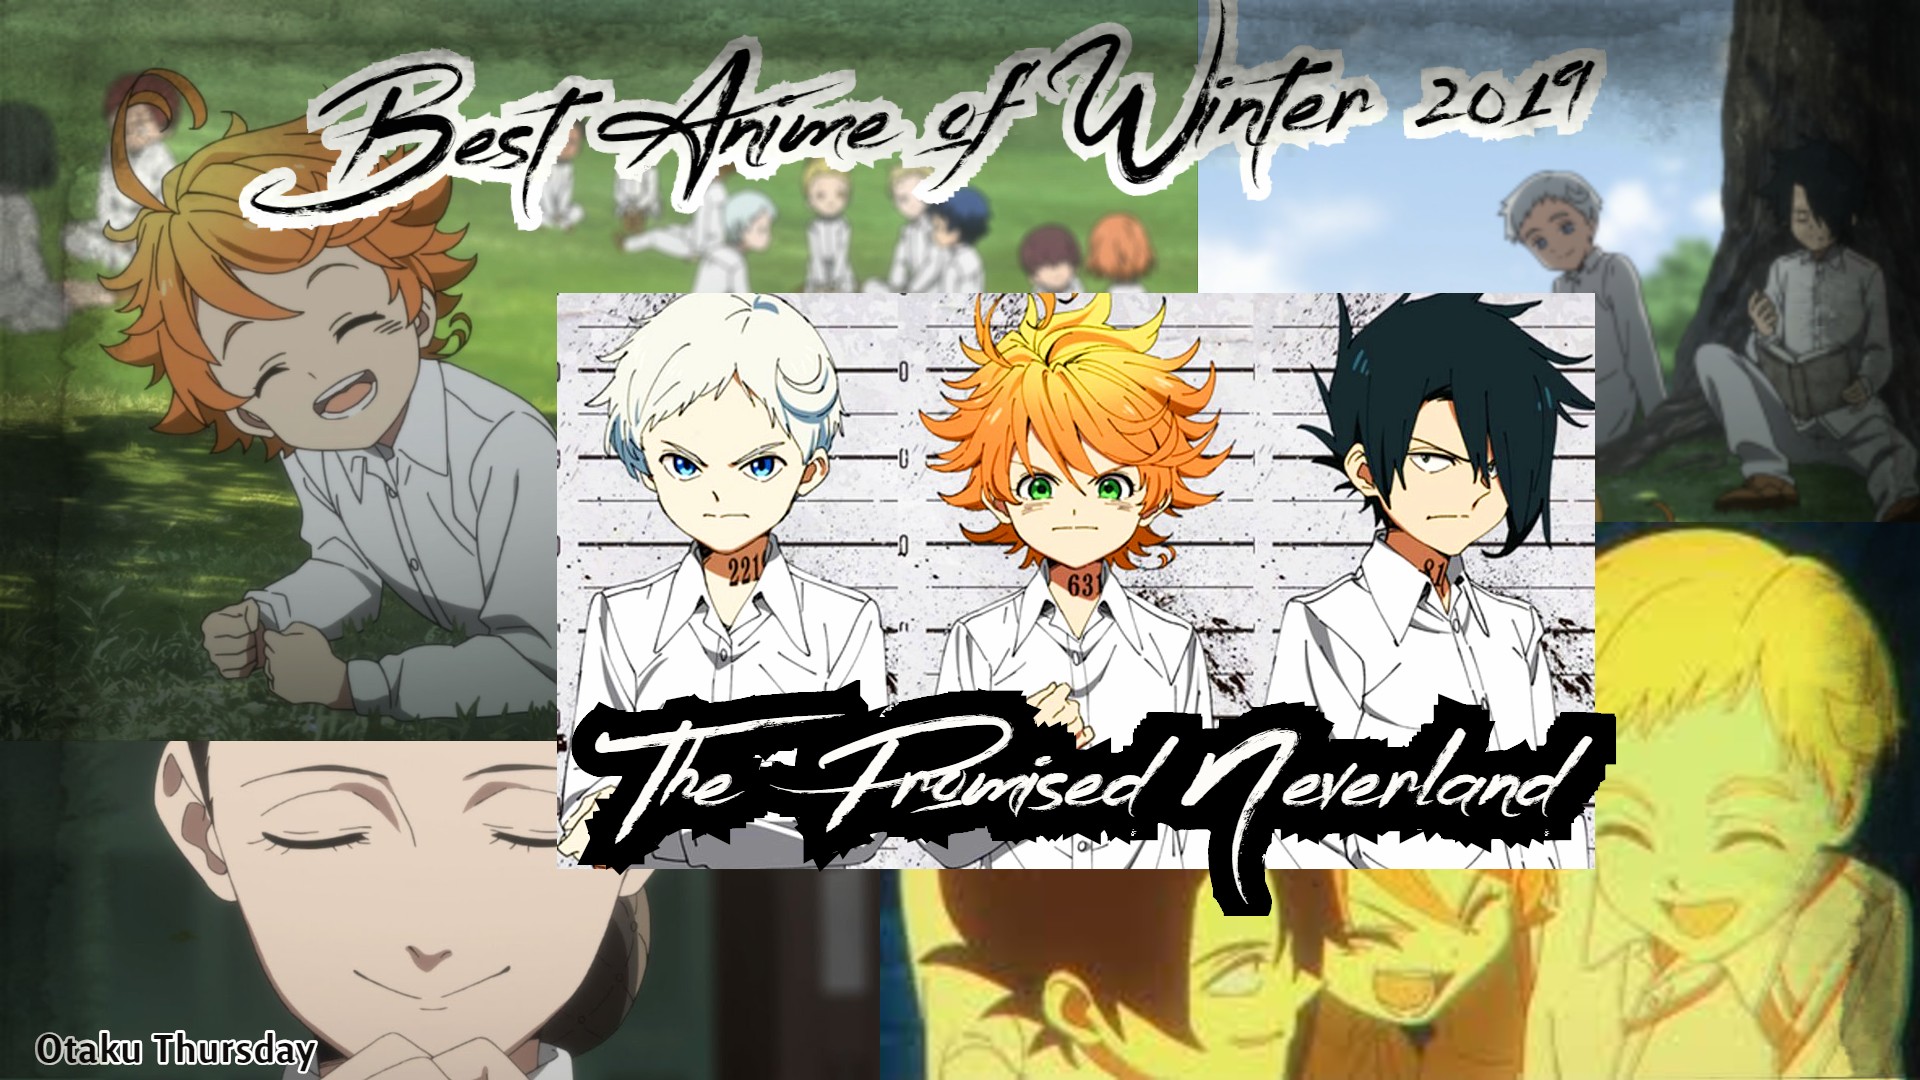 Is 'The Promised Neverland' the Best-Written Anime?